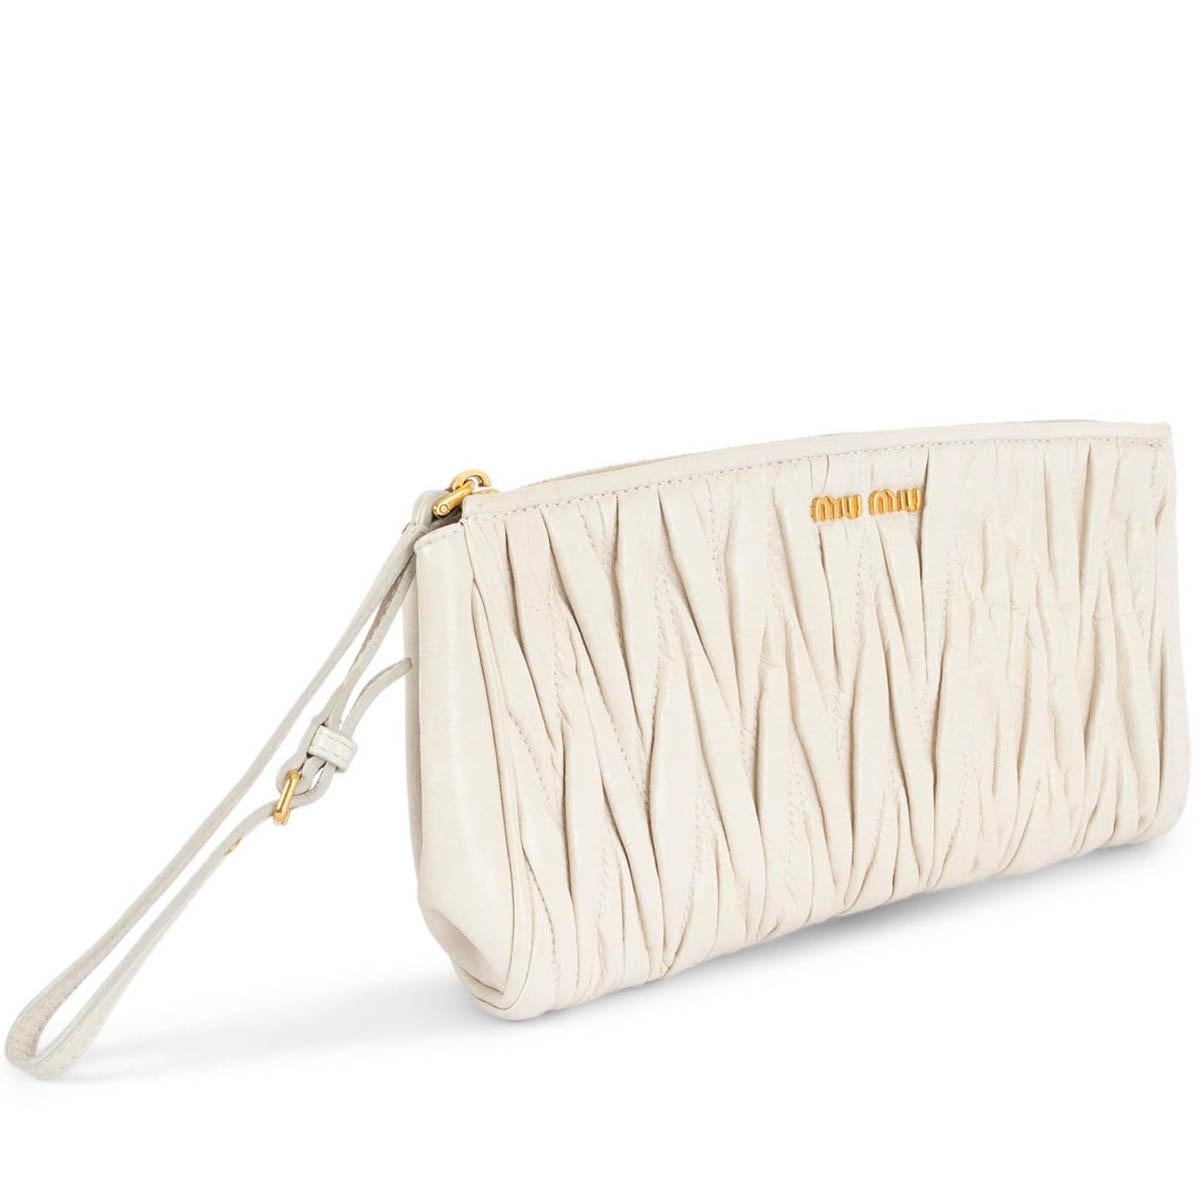 100% authentic Miu Miu Matelassé wristlet clutch in ivory smootch calfskin featuring gold-tone hardware. Lined in dark brown canvas.Has been carried and is in excellent condition. 

Measurements
Height	12cm (4.7in)
Width	24cm (9.4in)
Depth	3cm